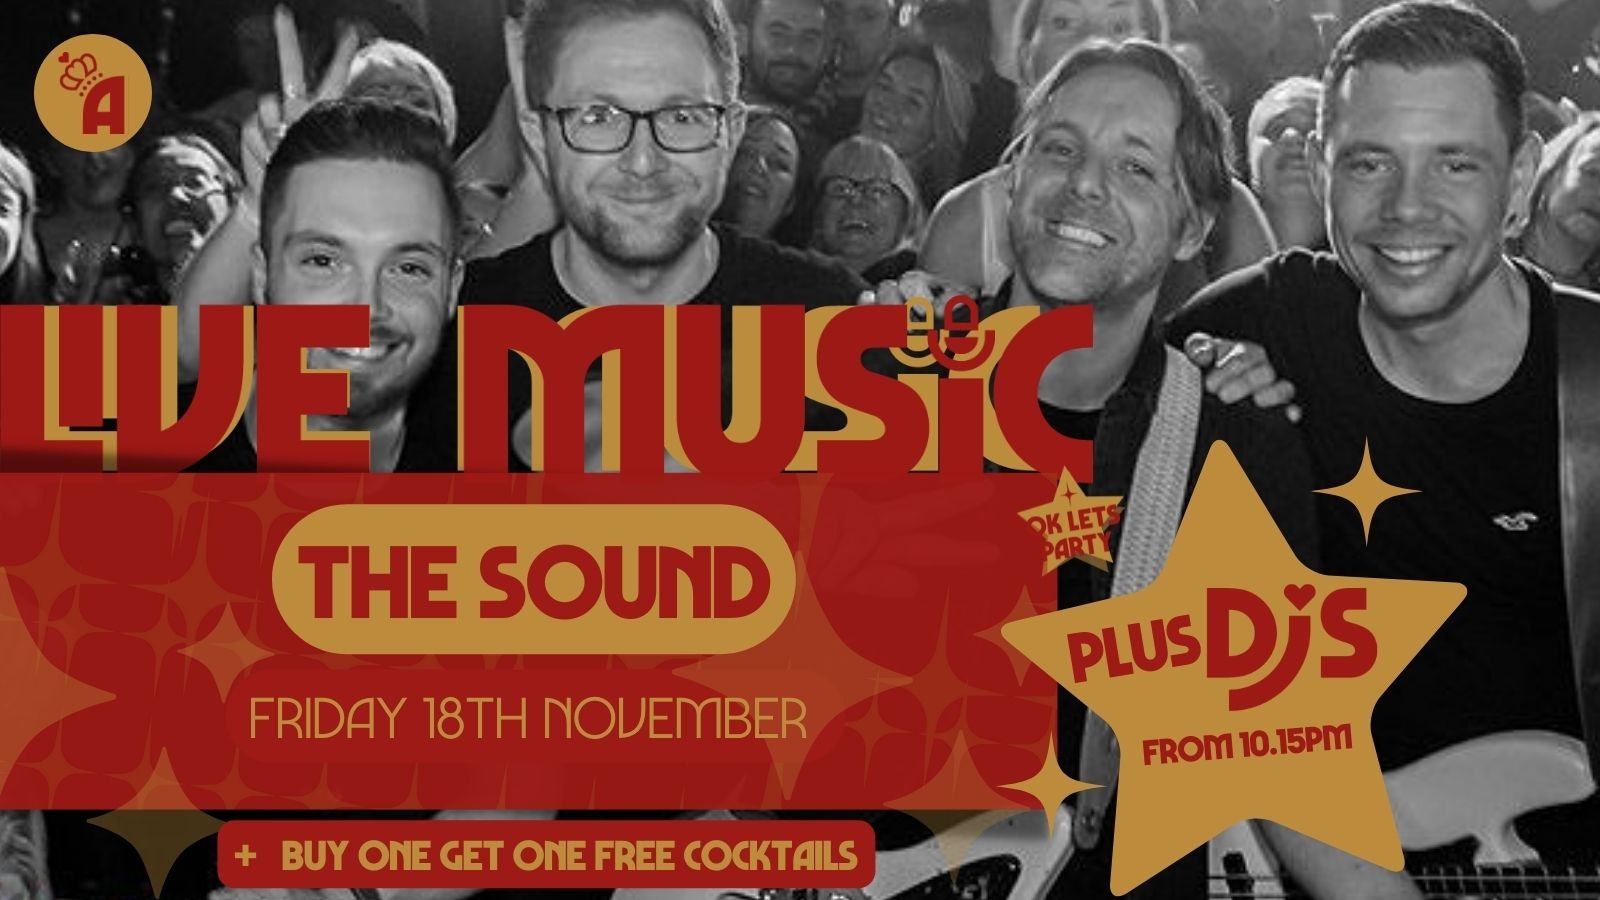 Live Music: THE SOUND // Annabel’s Cabaret & Discotheque